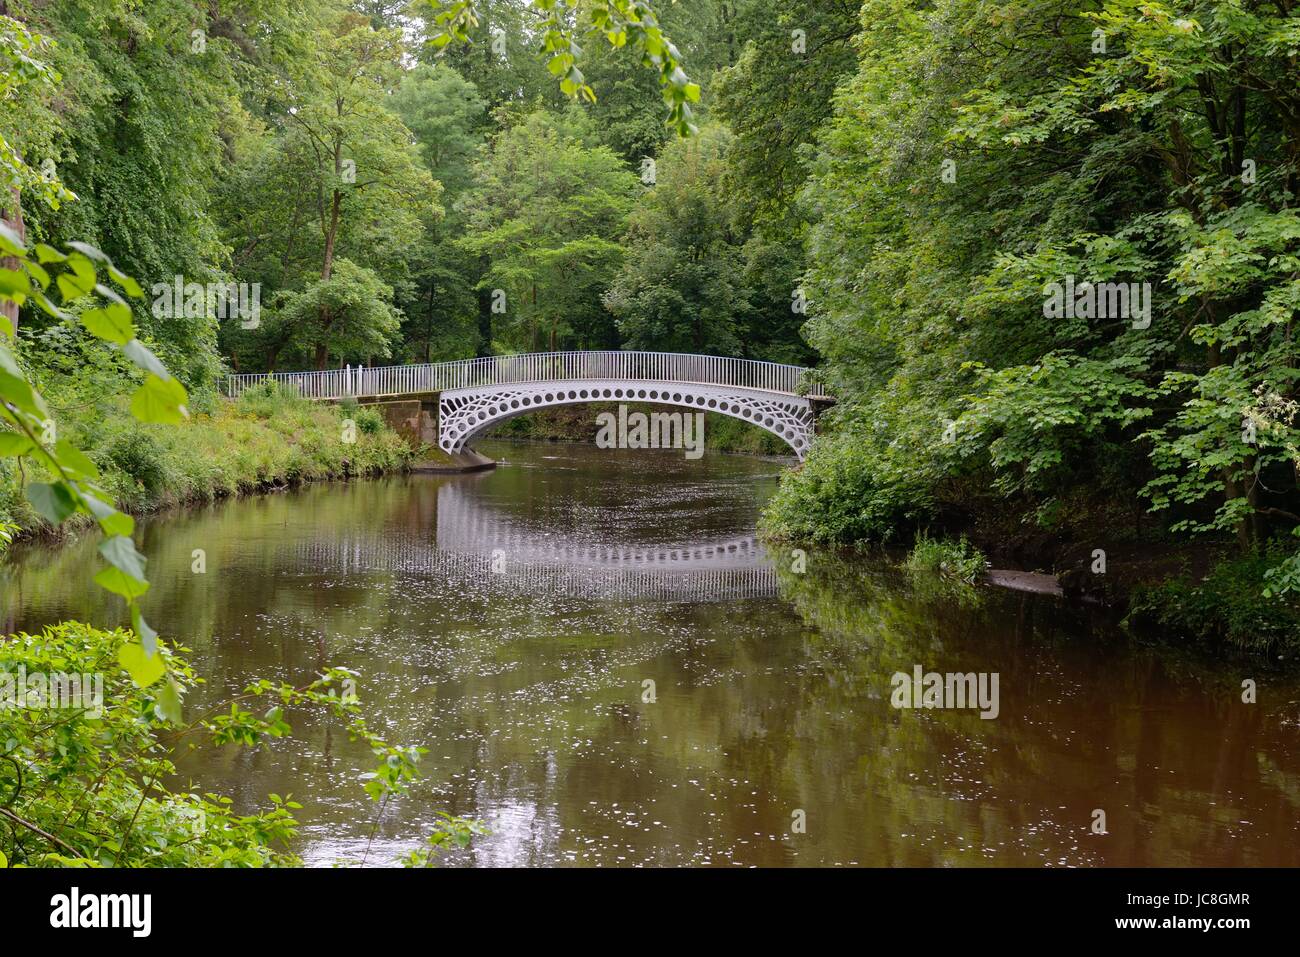 The Ha'penny (Halfpenny) Bridge in Linn Park, Scotland Also known as the White Bridge. Built in 1835, it is the oldest cast iron bridge in Glasgow. Stock Photo